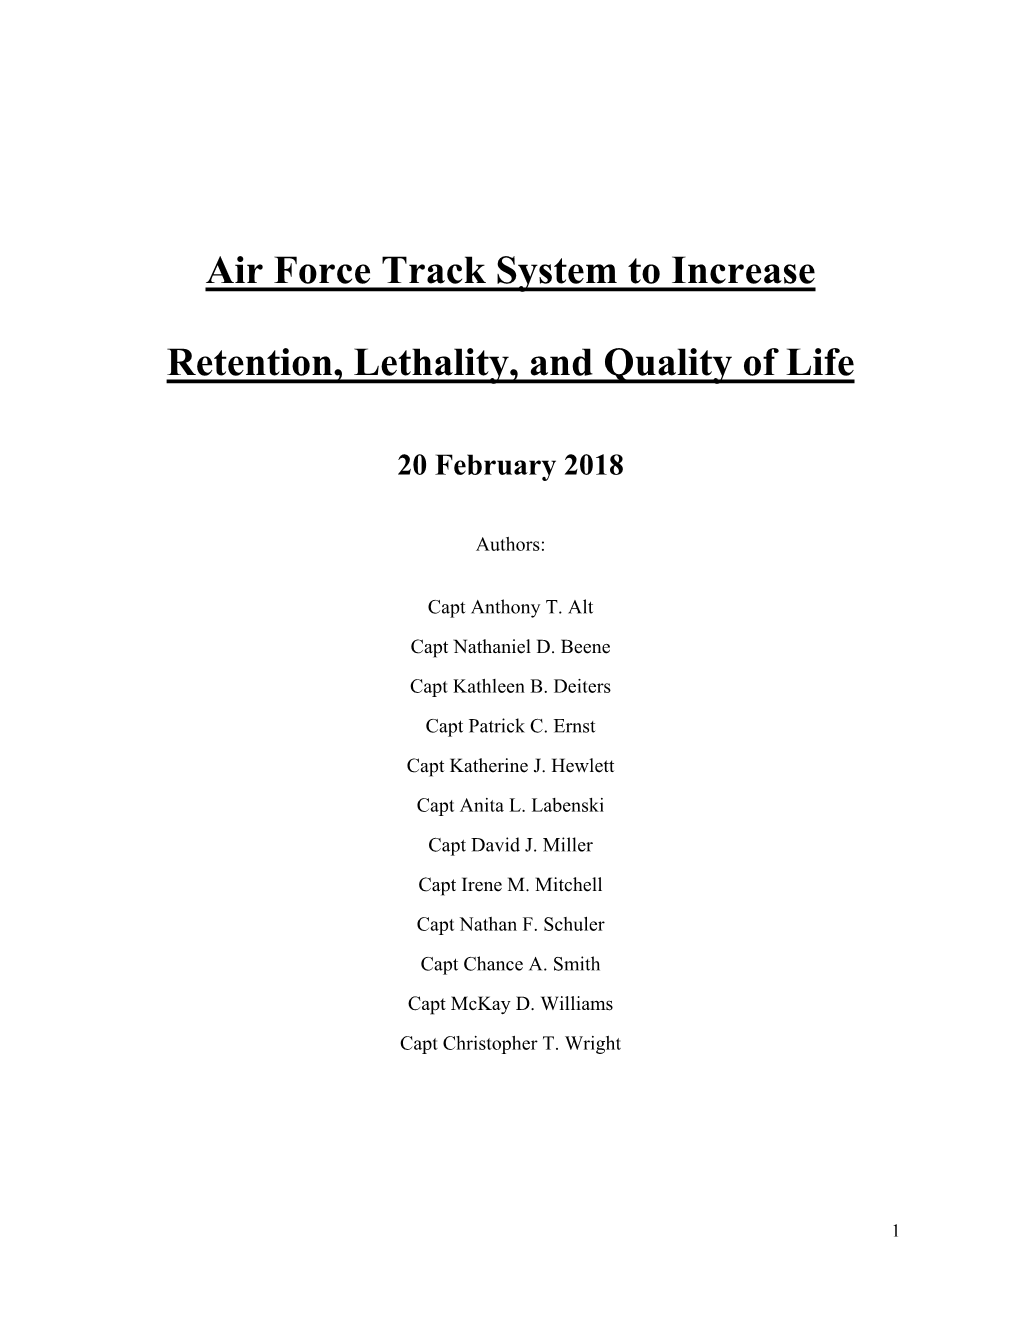 Air Force Track System to Increase Retention, Lethality, and Quality Of